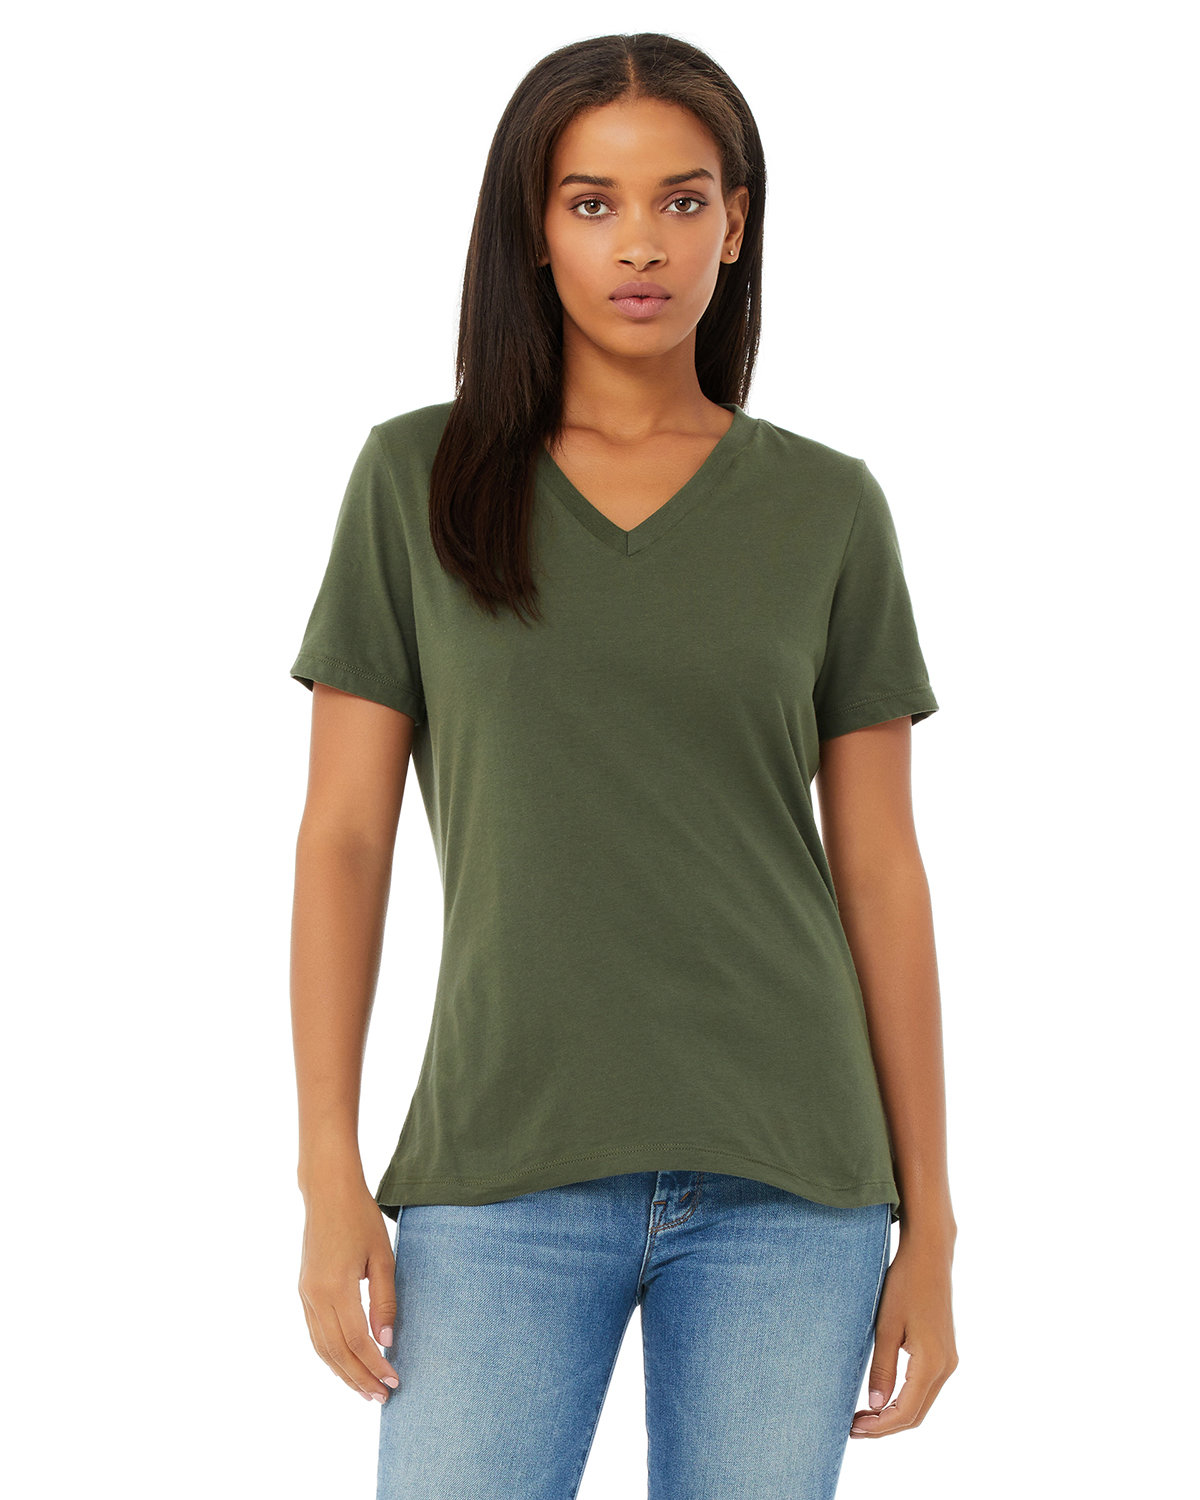 click to view MILITARY GREEN